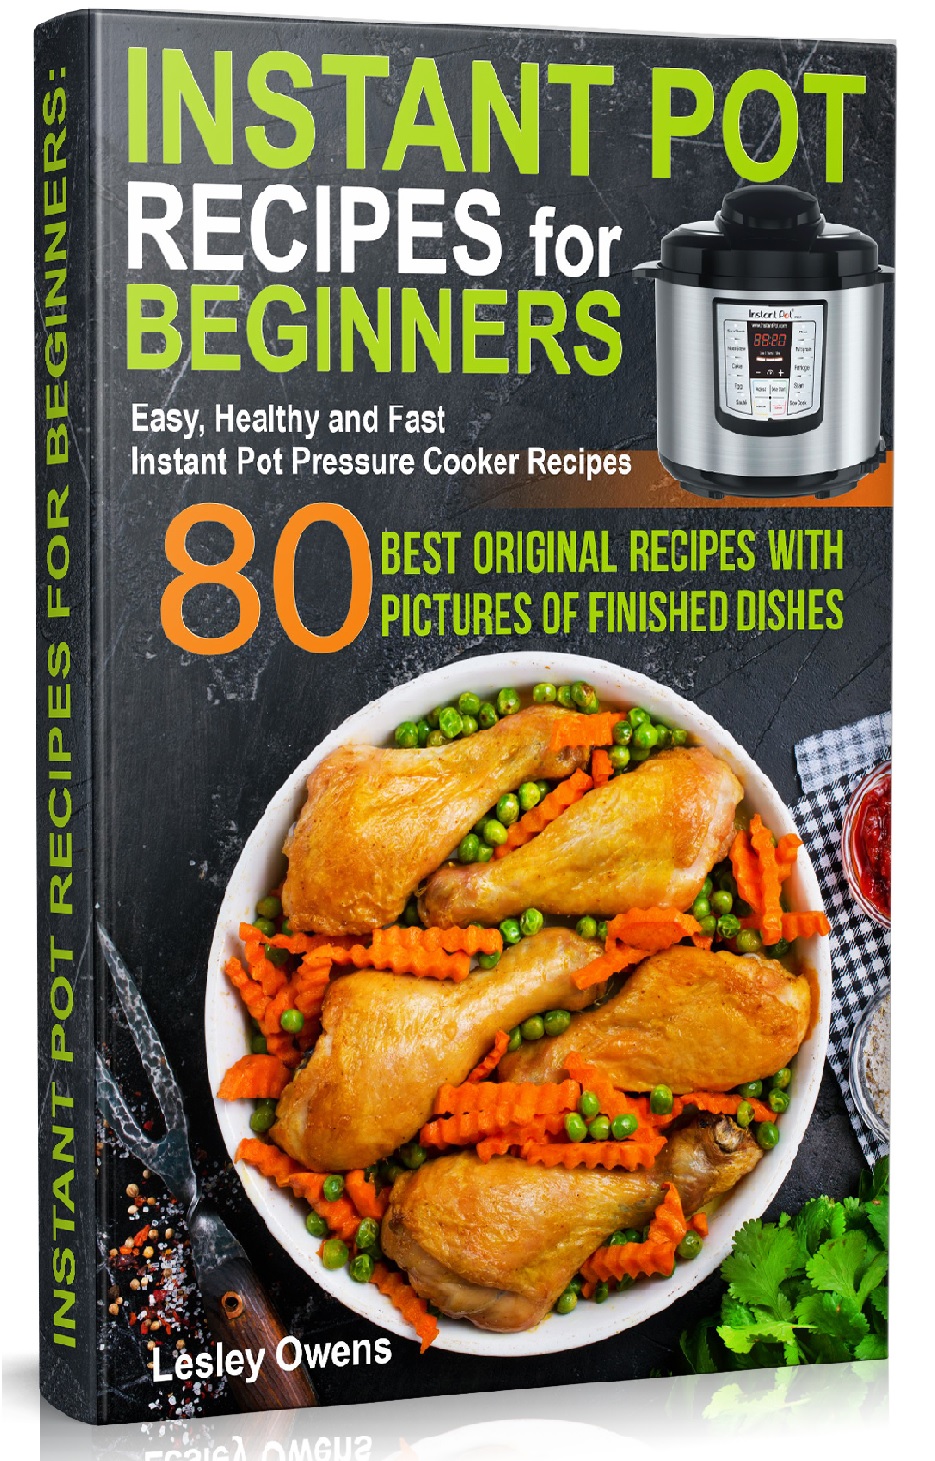 FREE: Instant Pot Recipes for Beginners: 80 BEST ORIGINAL RECIPES WITH PICTURES OF FINISHED DISHES (Easy, Healthy and Fast Instant Pot Pressure Cooker Recipes) by Lesley Owens